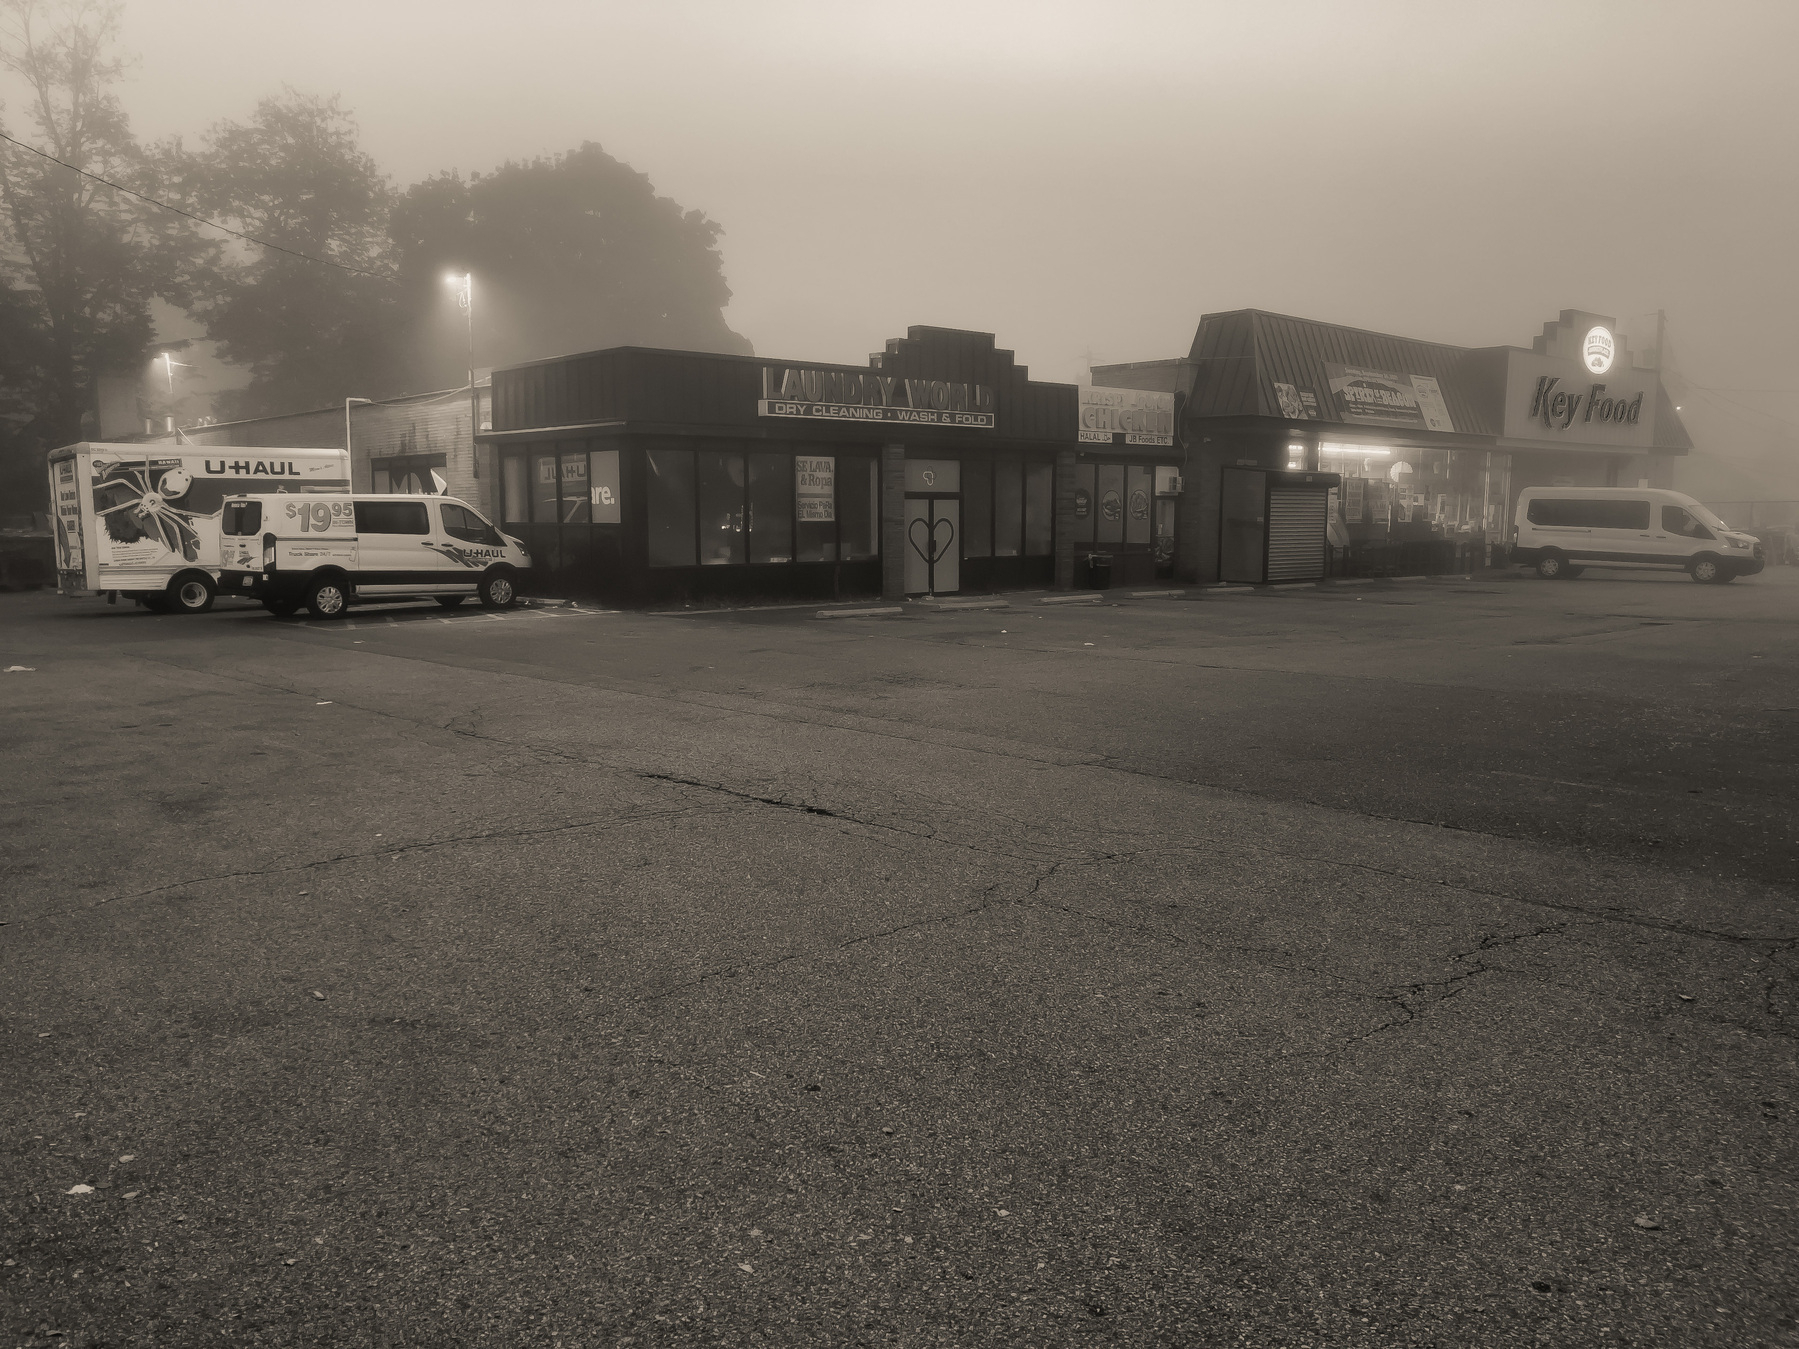 Small shopping mall across a parking lot shrouded in fog.